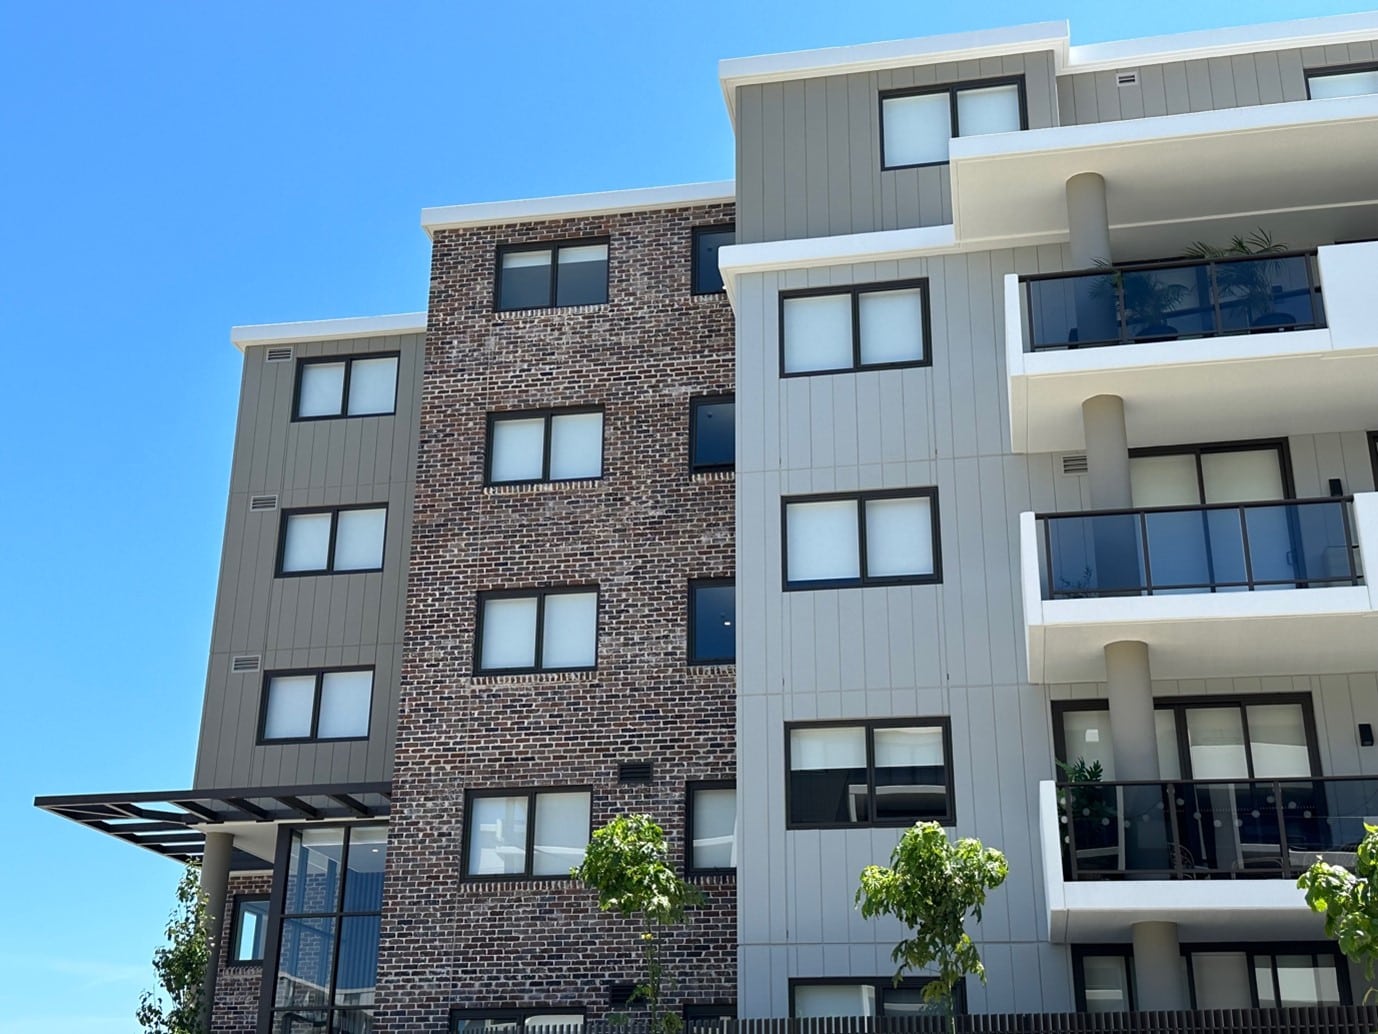 Durable and long-lasting, Hebel PowerPattern® was specified in the exteriors of over 1,000 apartments in ALAND’s Schofield Gardens 